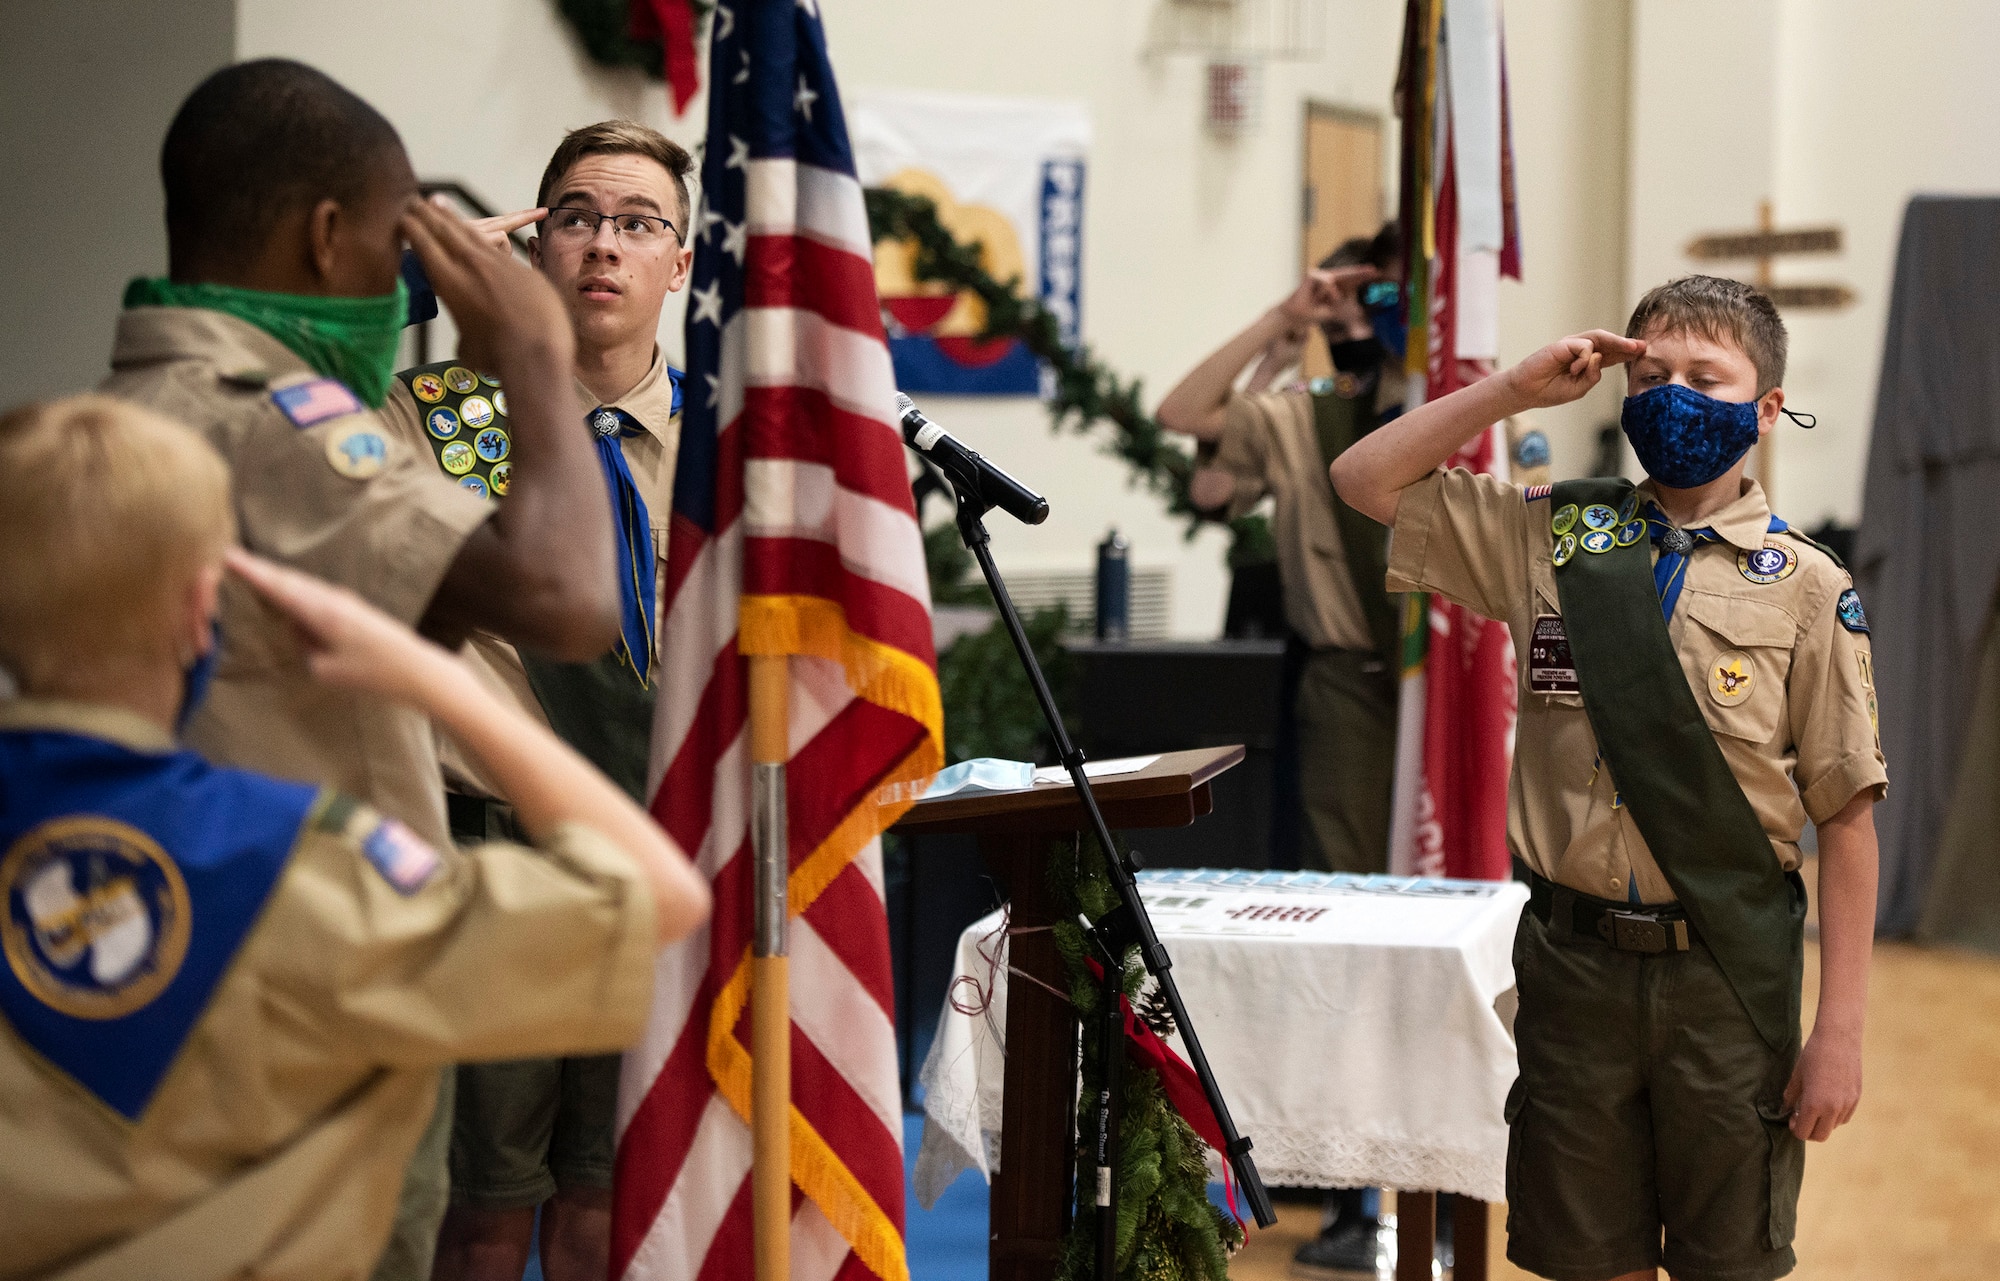 Boy Scout Troop 162 members salute the flag during the opening ceremony of a monthly court of honor Dec. 13, 2021, in Fairborn, Ohio. In addition to the usual awarding of merit badges and advancement in scout ranks, the gathering marked the 75th anniversary of the troop, which began as the Wright-Patterson Air Force Base troop. (U.S. Air Force photo by R.J. Oriez)